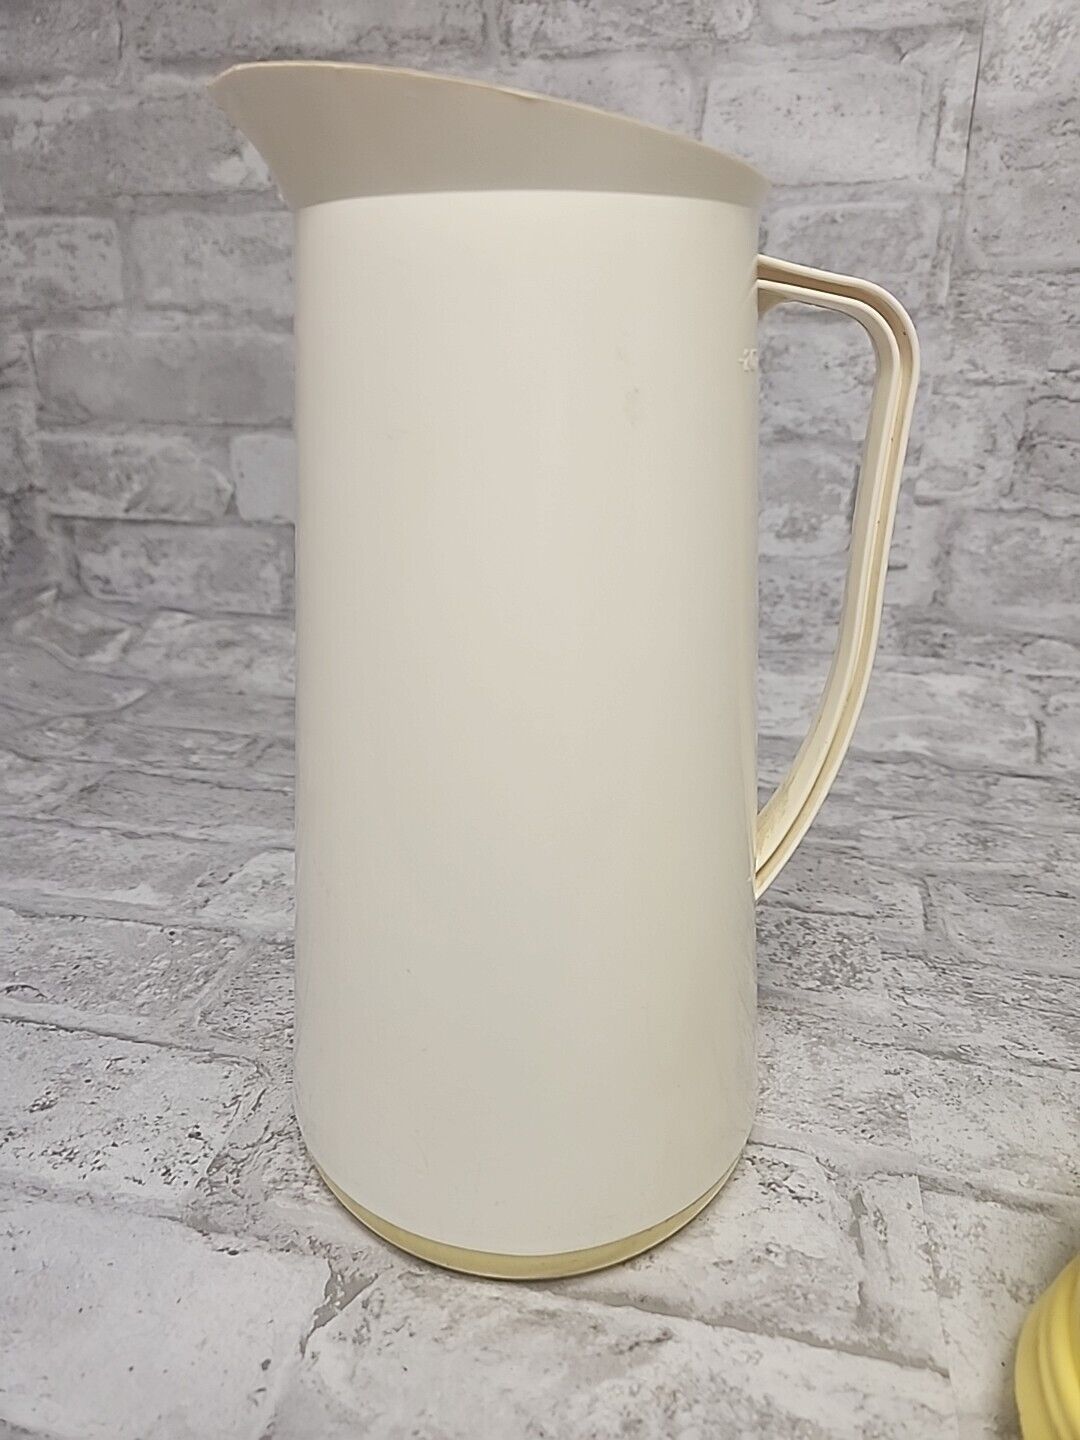 Vintage Carnation Company 2 Quart Pitcher With Stopper Lid Made In USA 